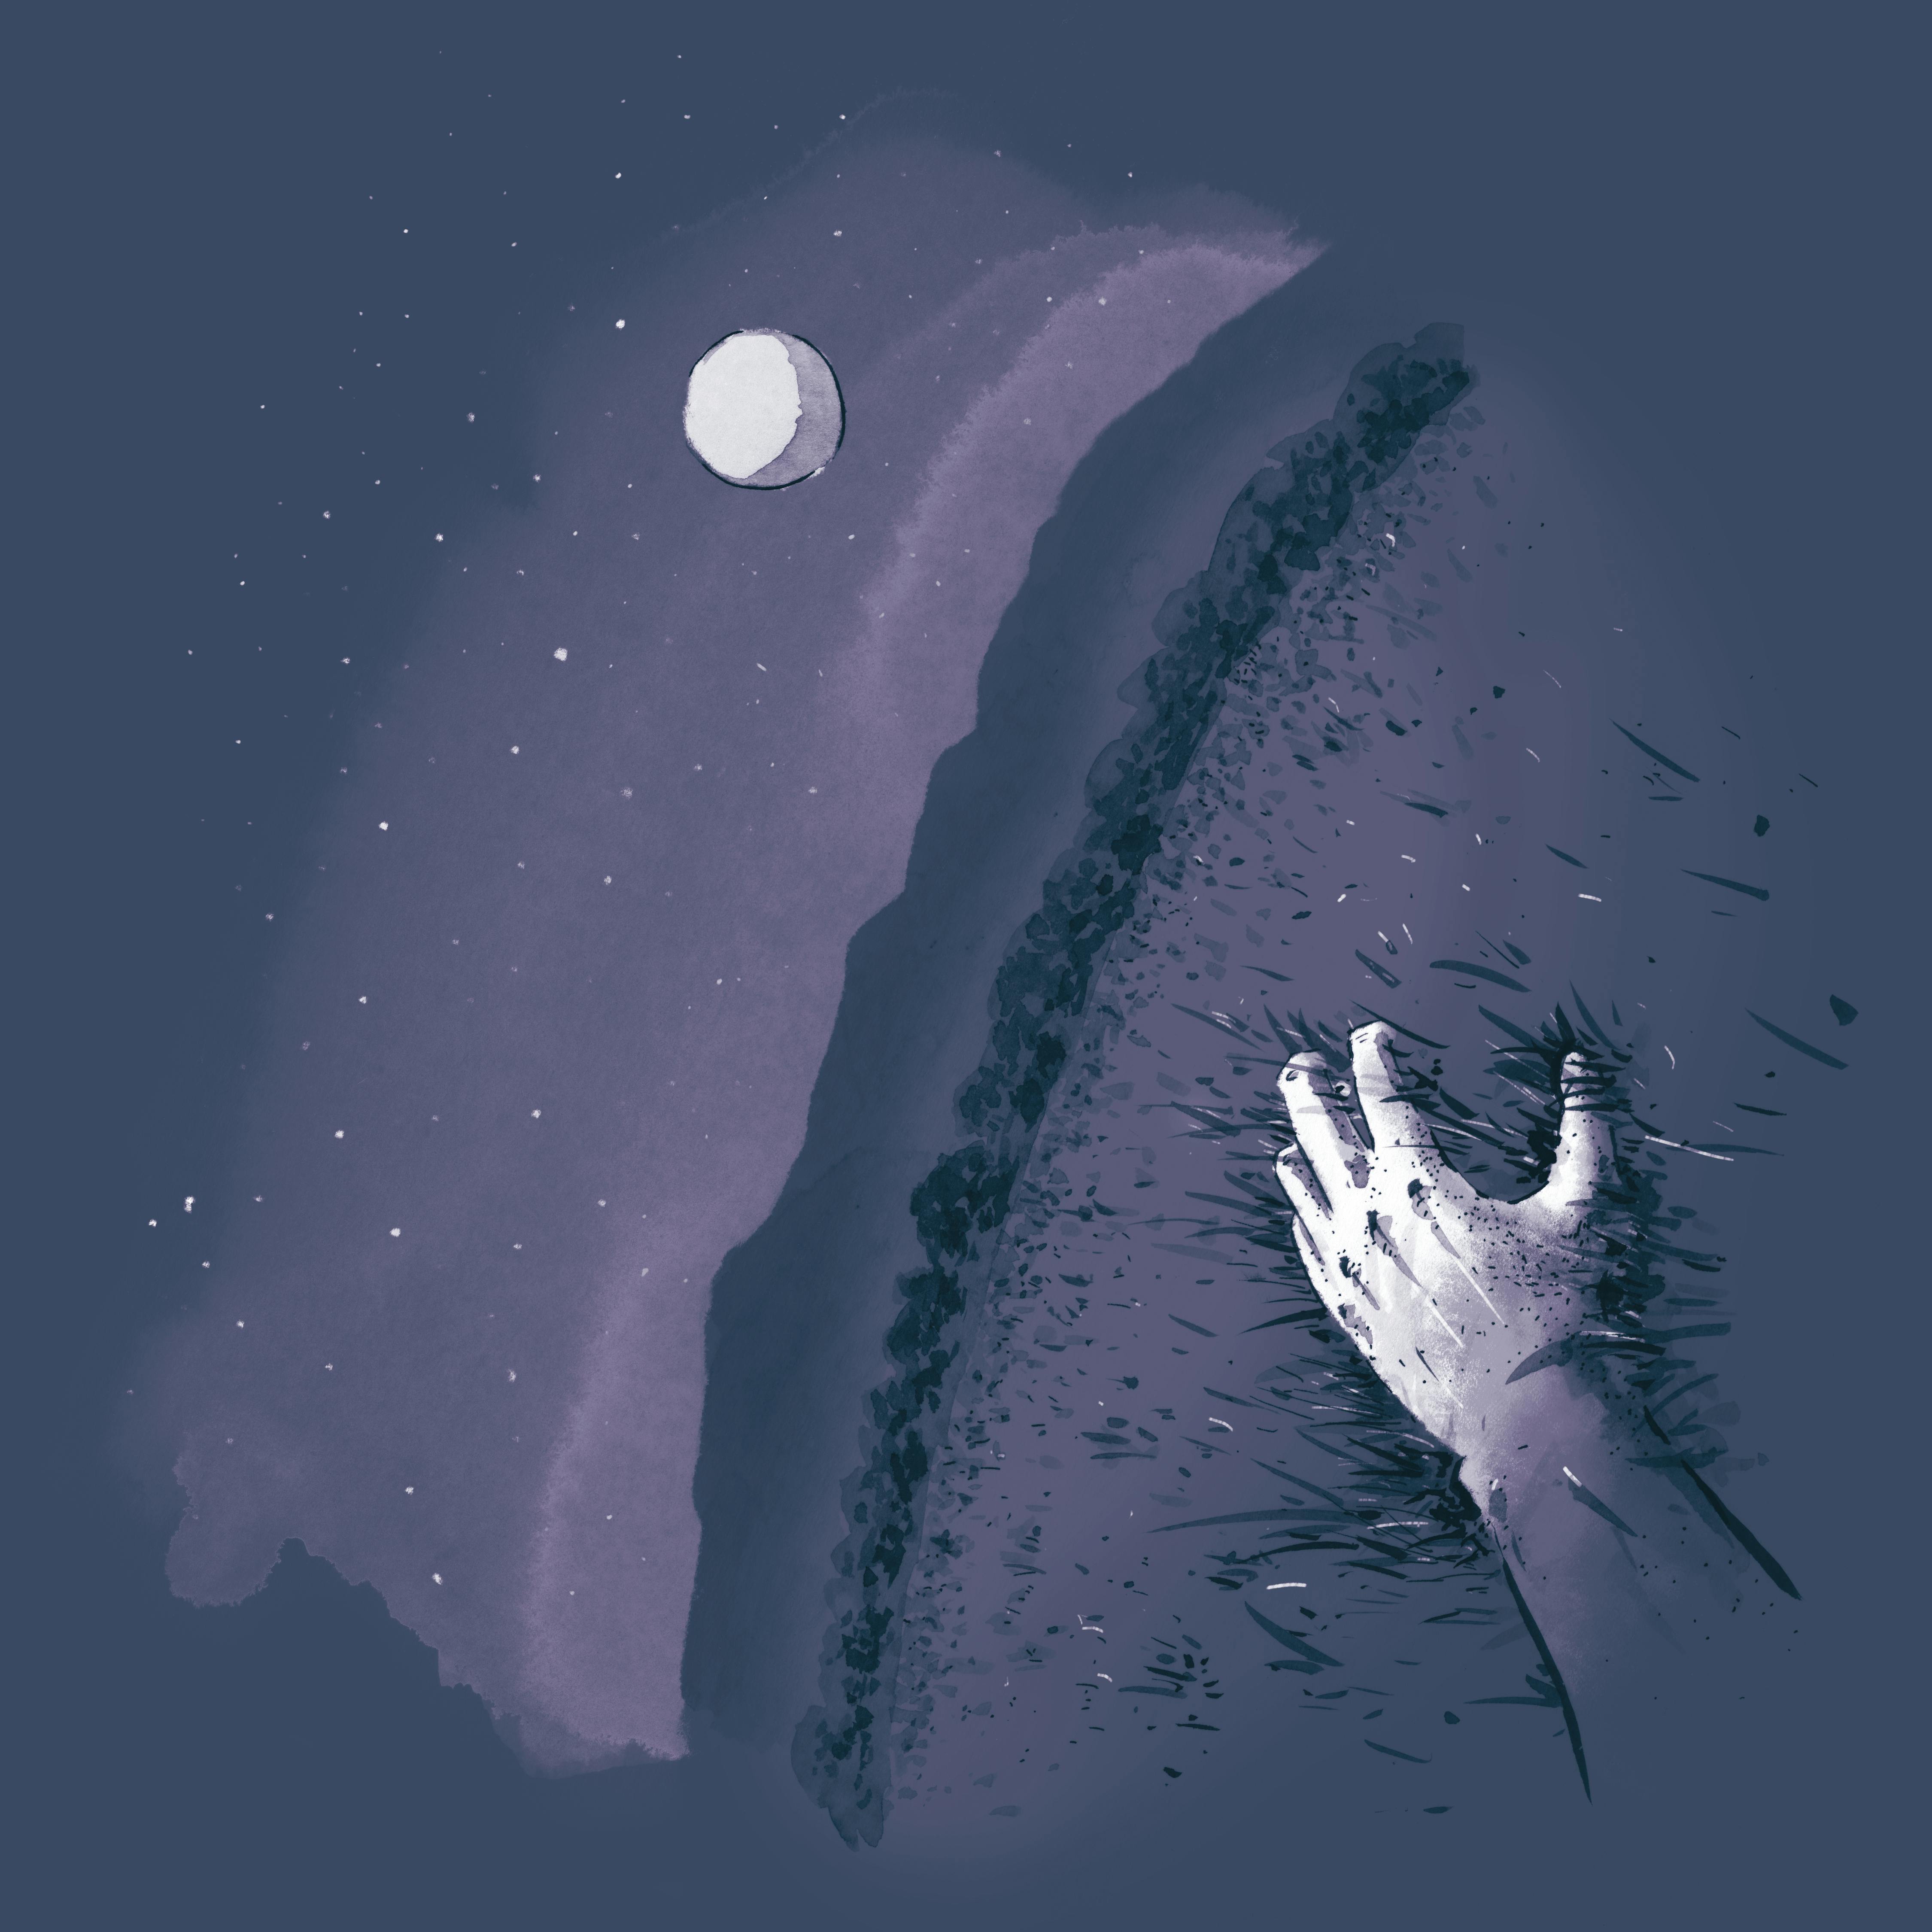 Illustration for Upward Abyss: a hand clings to the ground with trees, mountains, stars, and the moon visible on the tilted horizon.